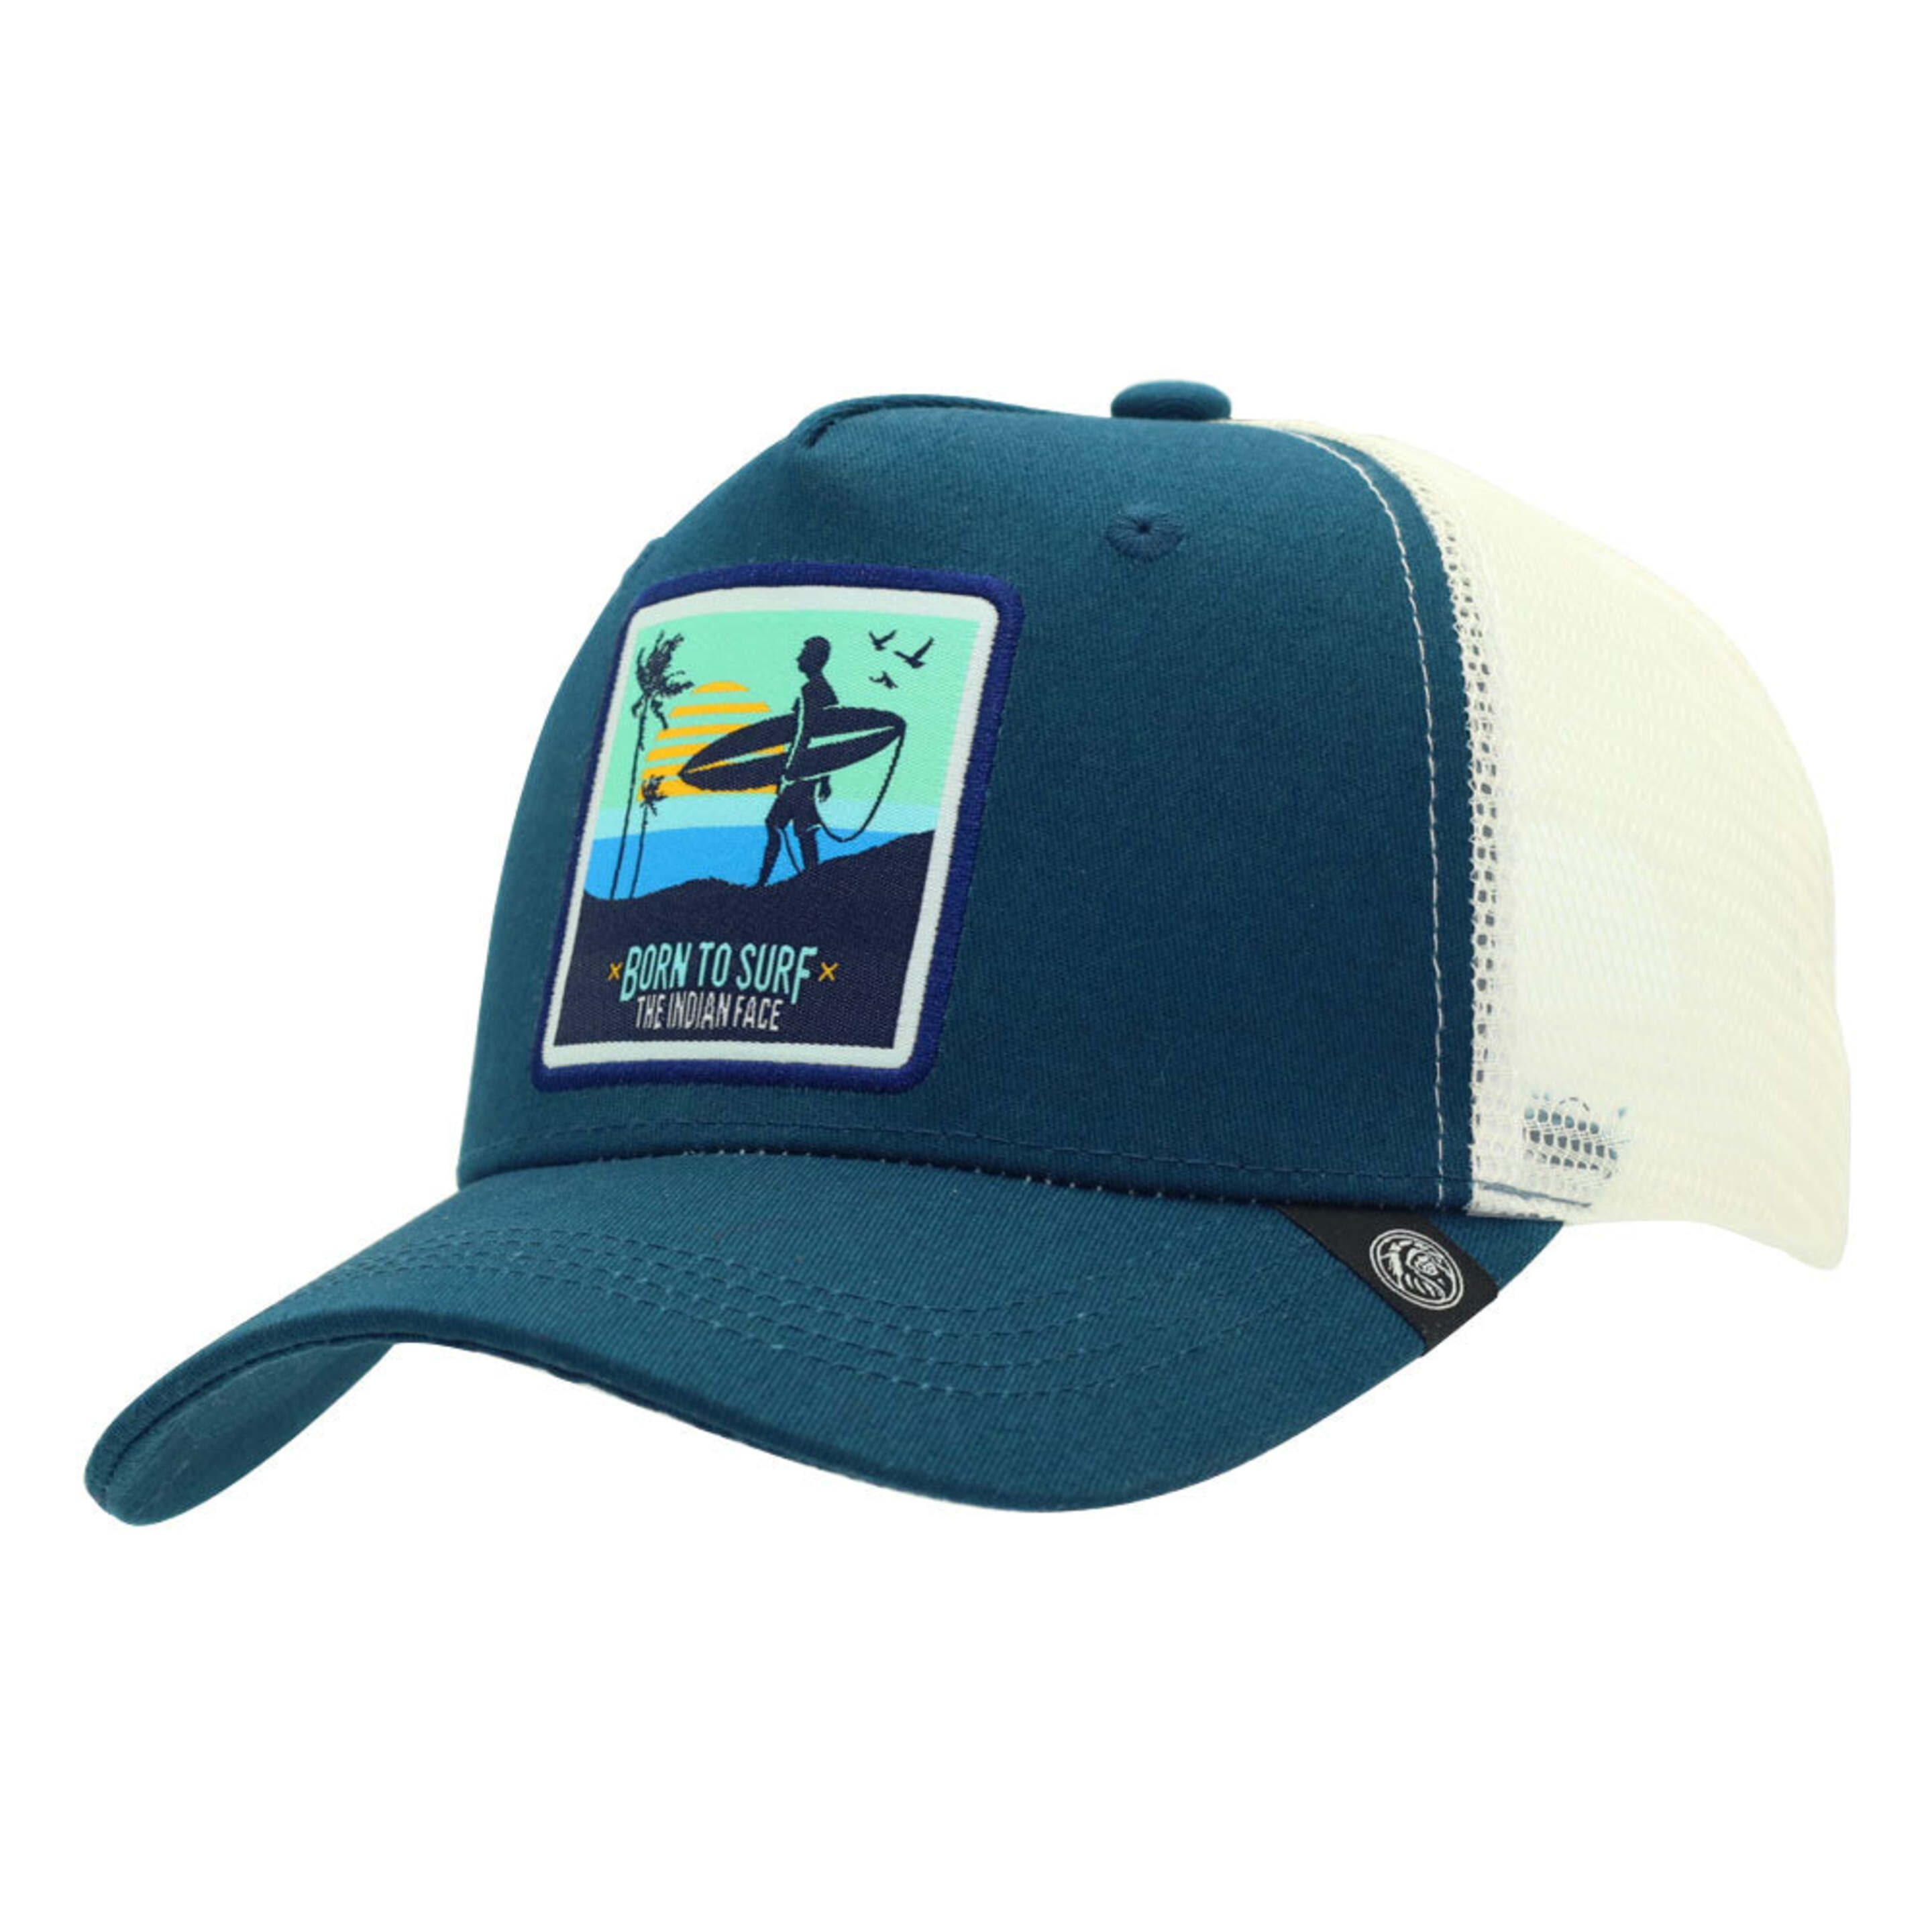 The Indian Face Gorra Surf Born To Surf